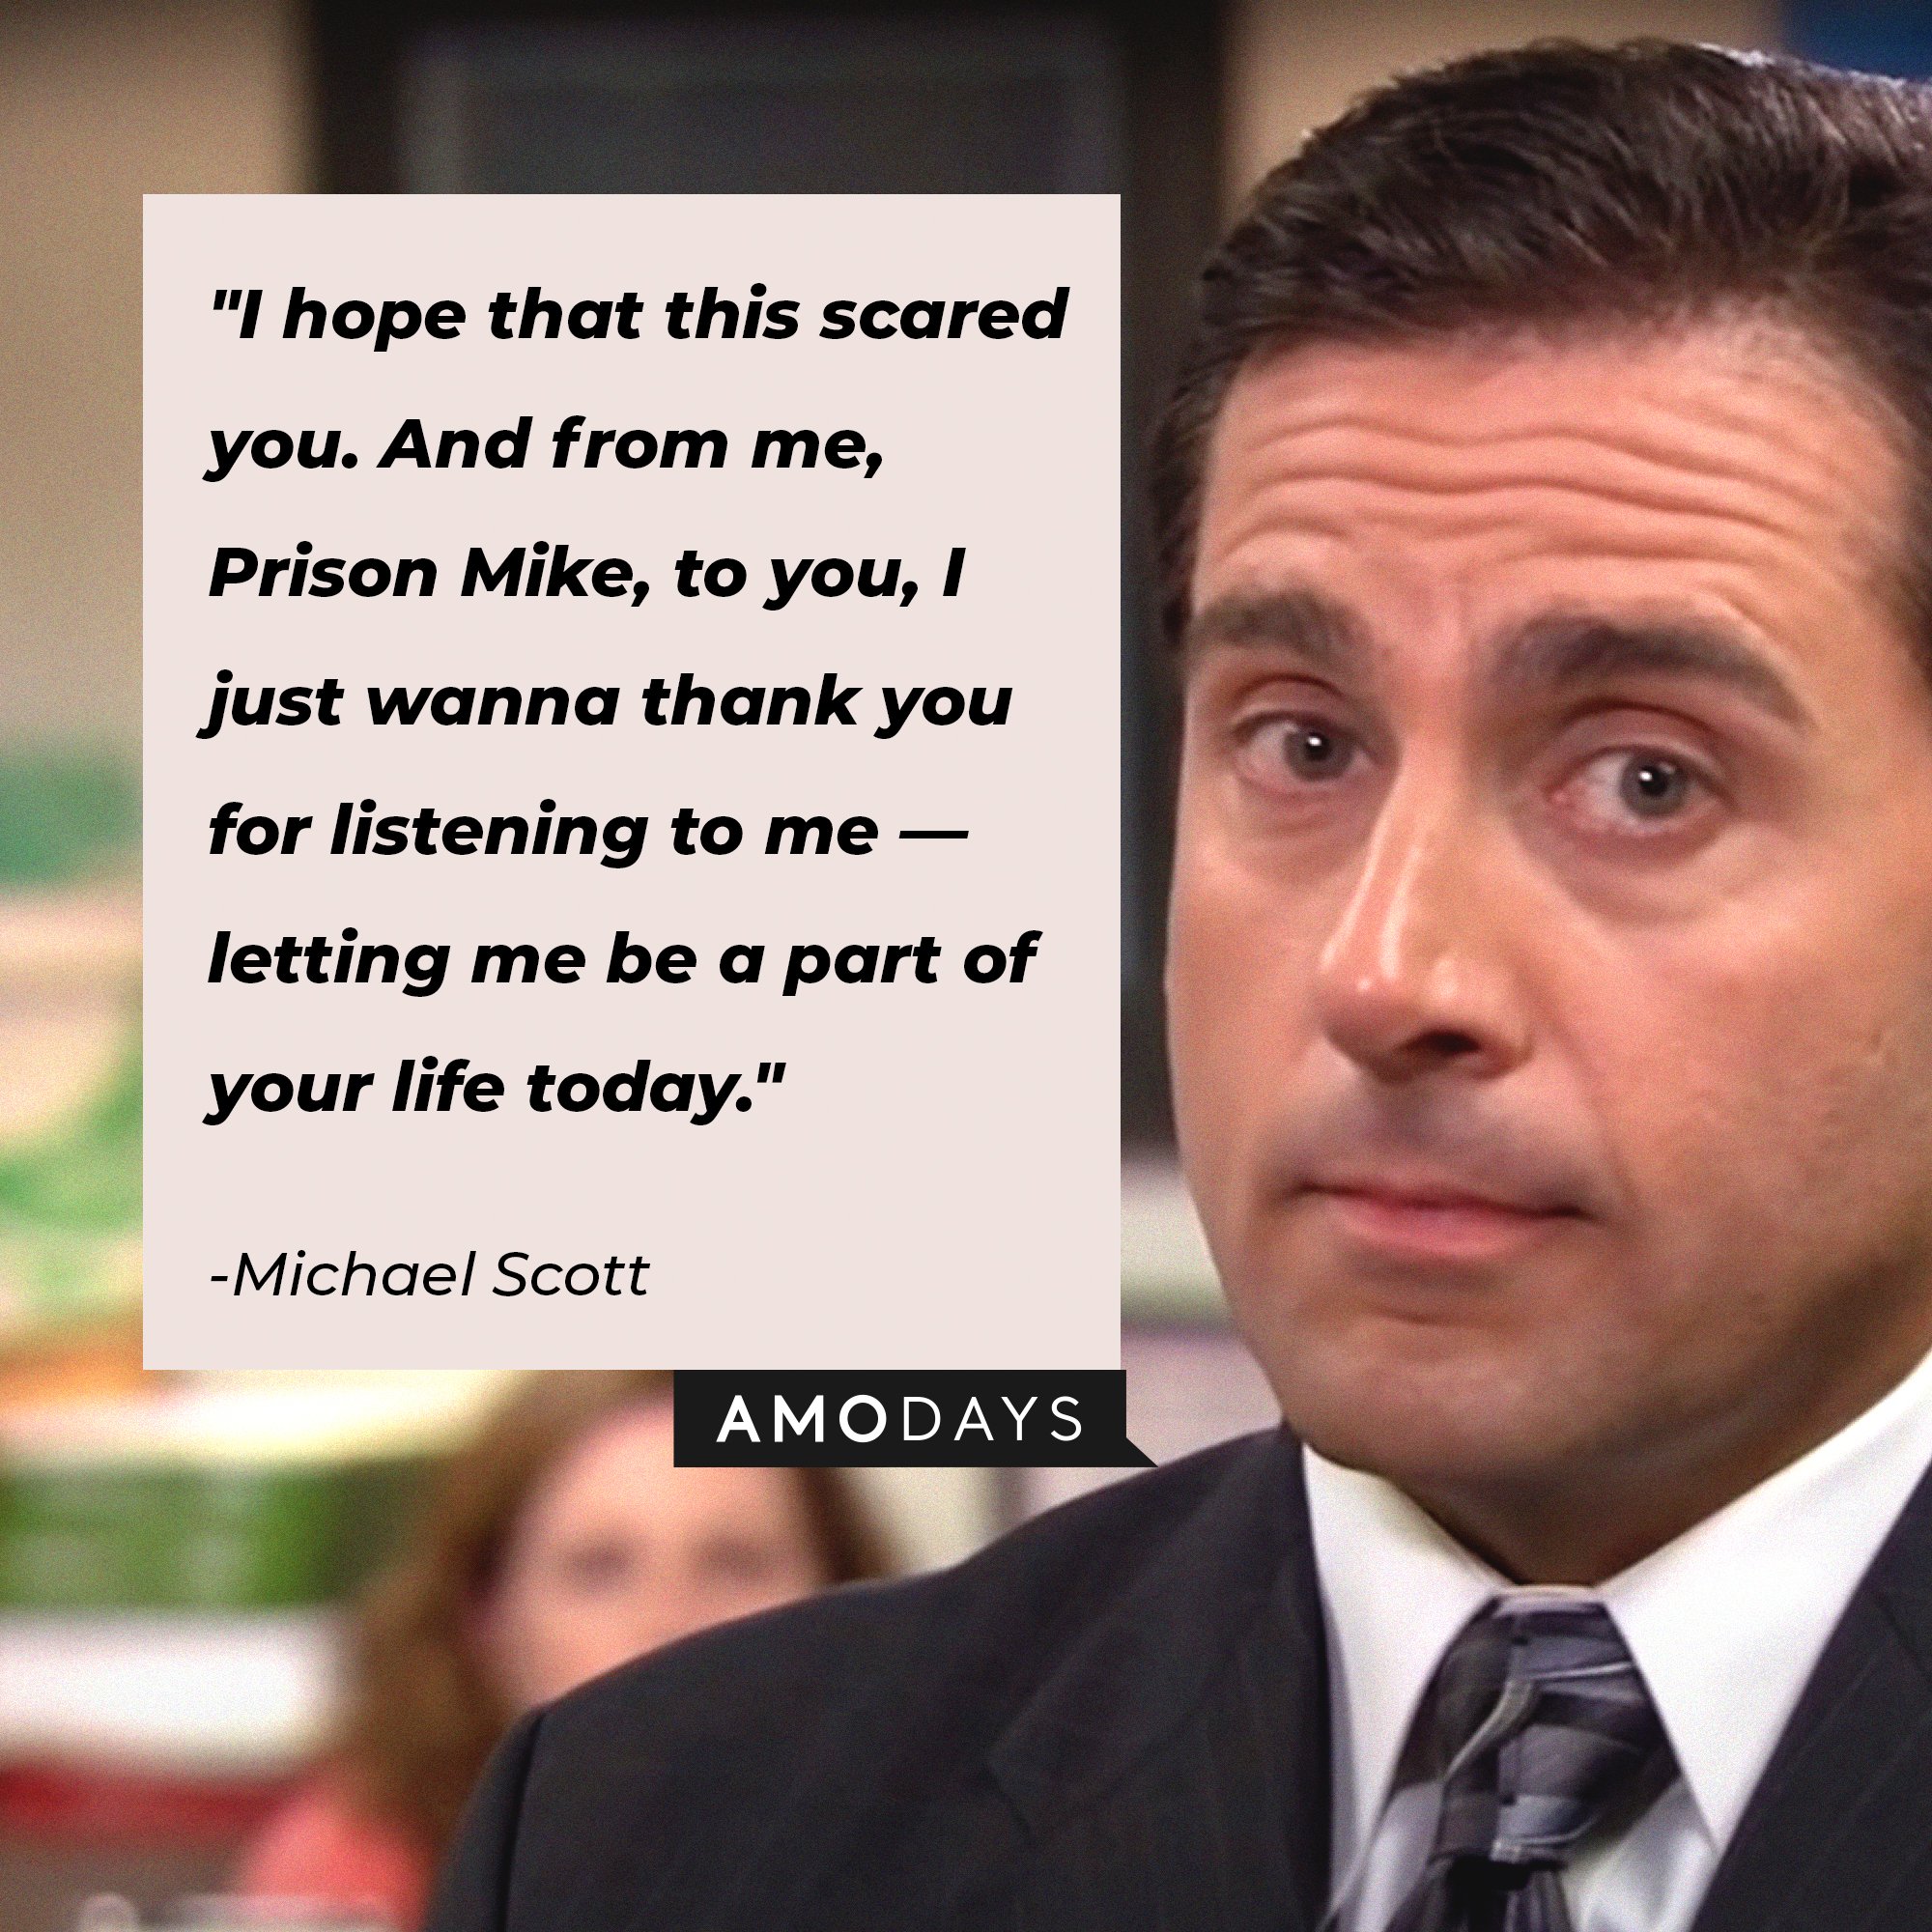  Michael Scott’s quote: "I hope that this scared you. And from me, Prison Mike, to you, I just wanna thank you for listening to me—letting me be a part of your life today." | Image: AmoDays